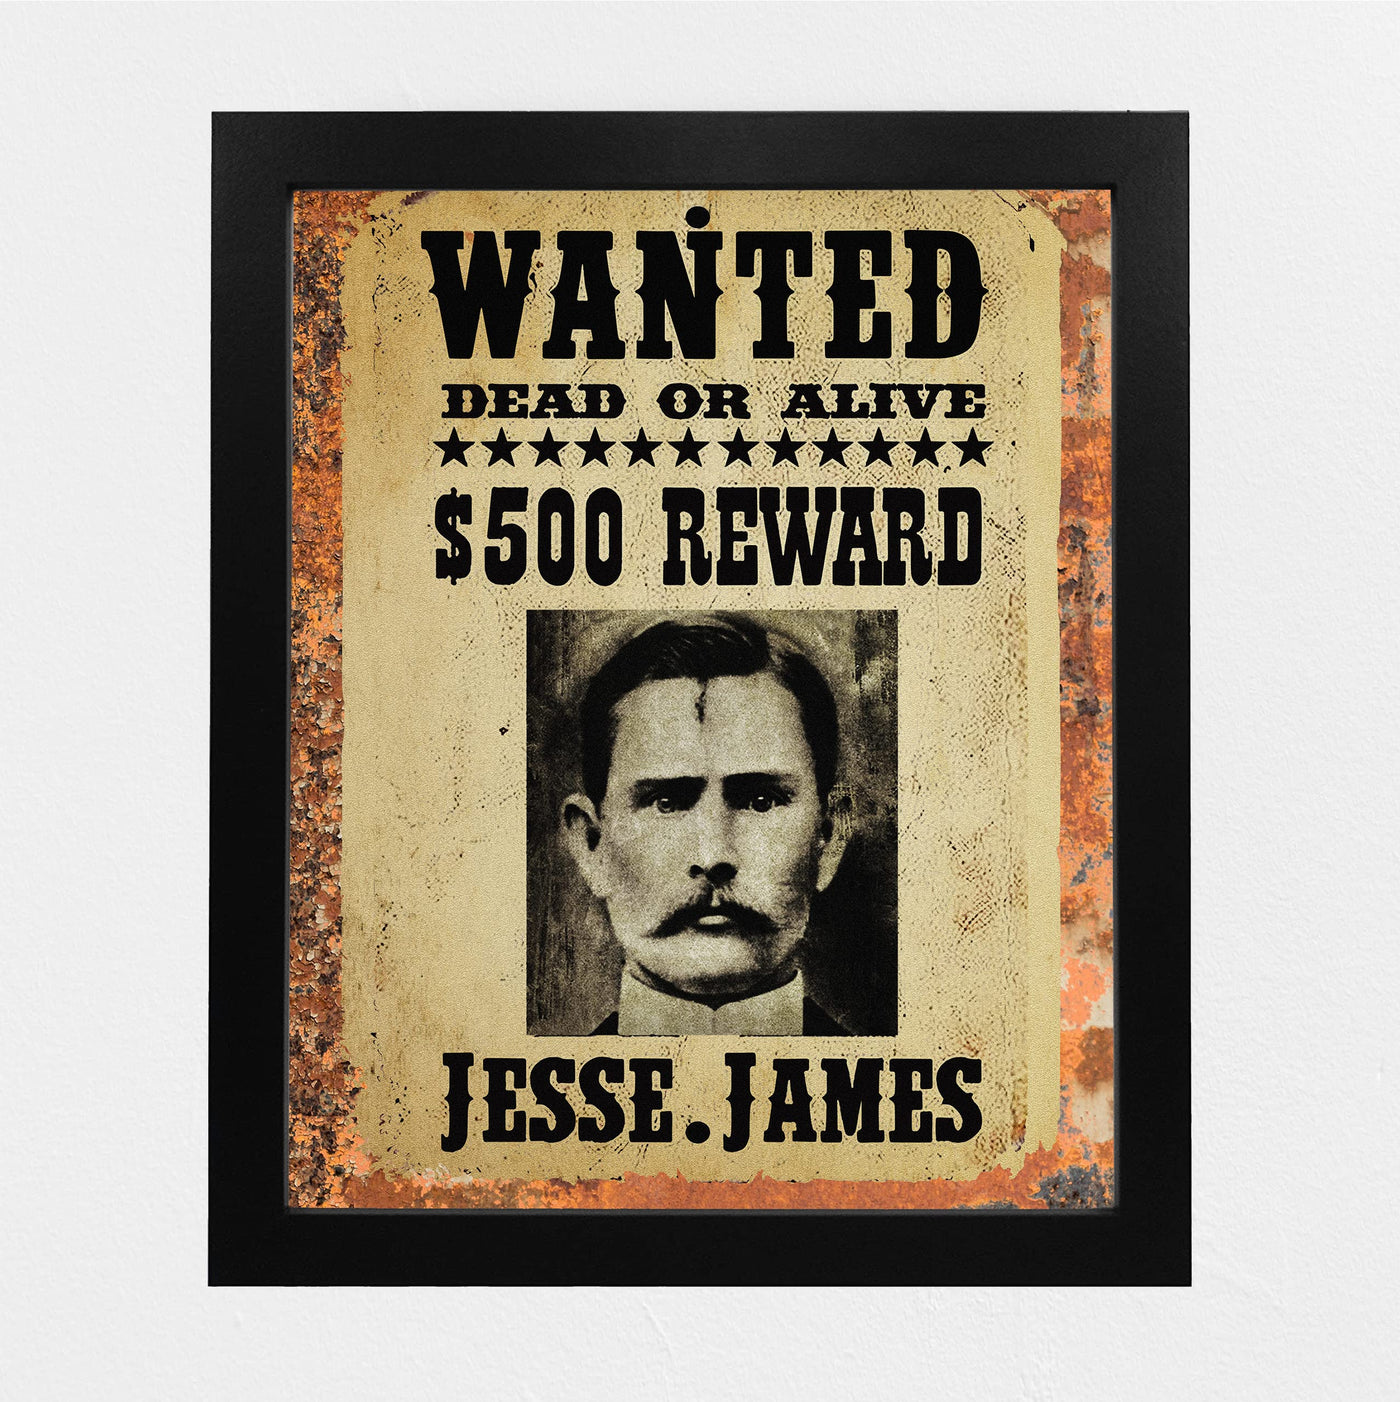 Wanted Dead Or Alive - Jesse James Rustic Western Wall Art Sign -8 x 10" Vintage Cowboy Movie Poster Print -Ready to Frame. Home-Office-Bar-Man Cave-Shop Decor. Perfect Gift for All Outlaws!